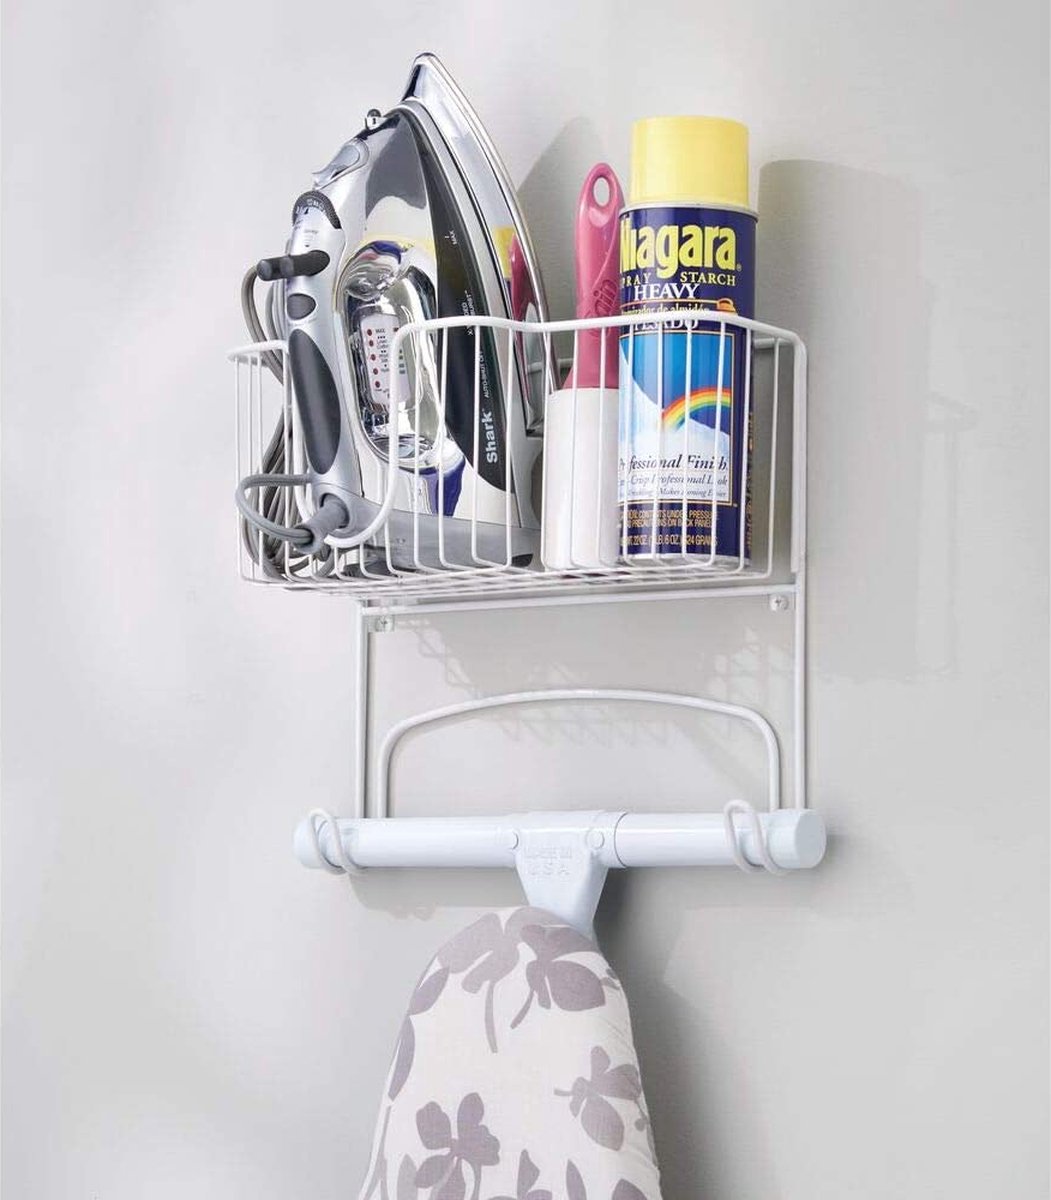 mDesign Wall Mounted Ironing Board Holder - Steel Ironing Board Stand for Easy Organization - Includes Basket for Iron Storage - White